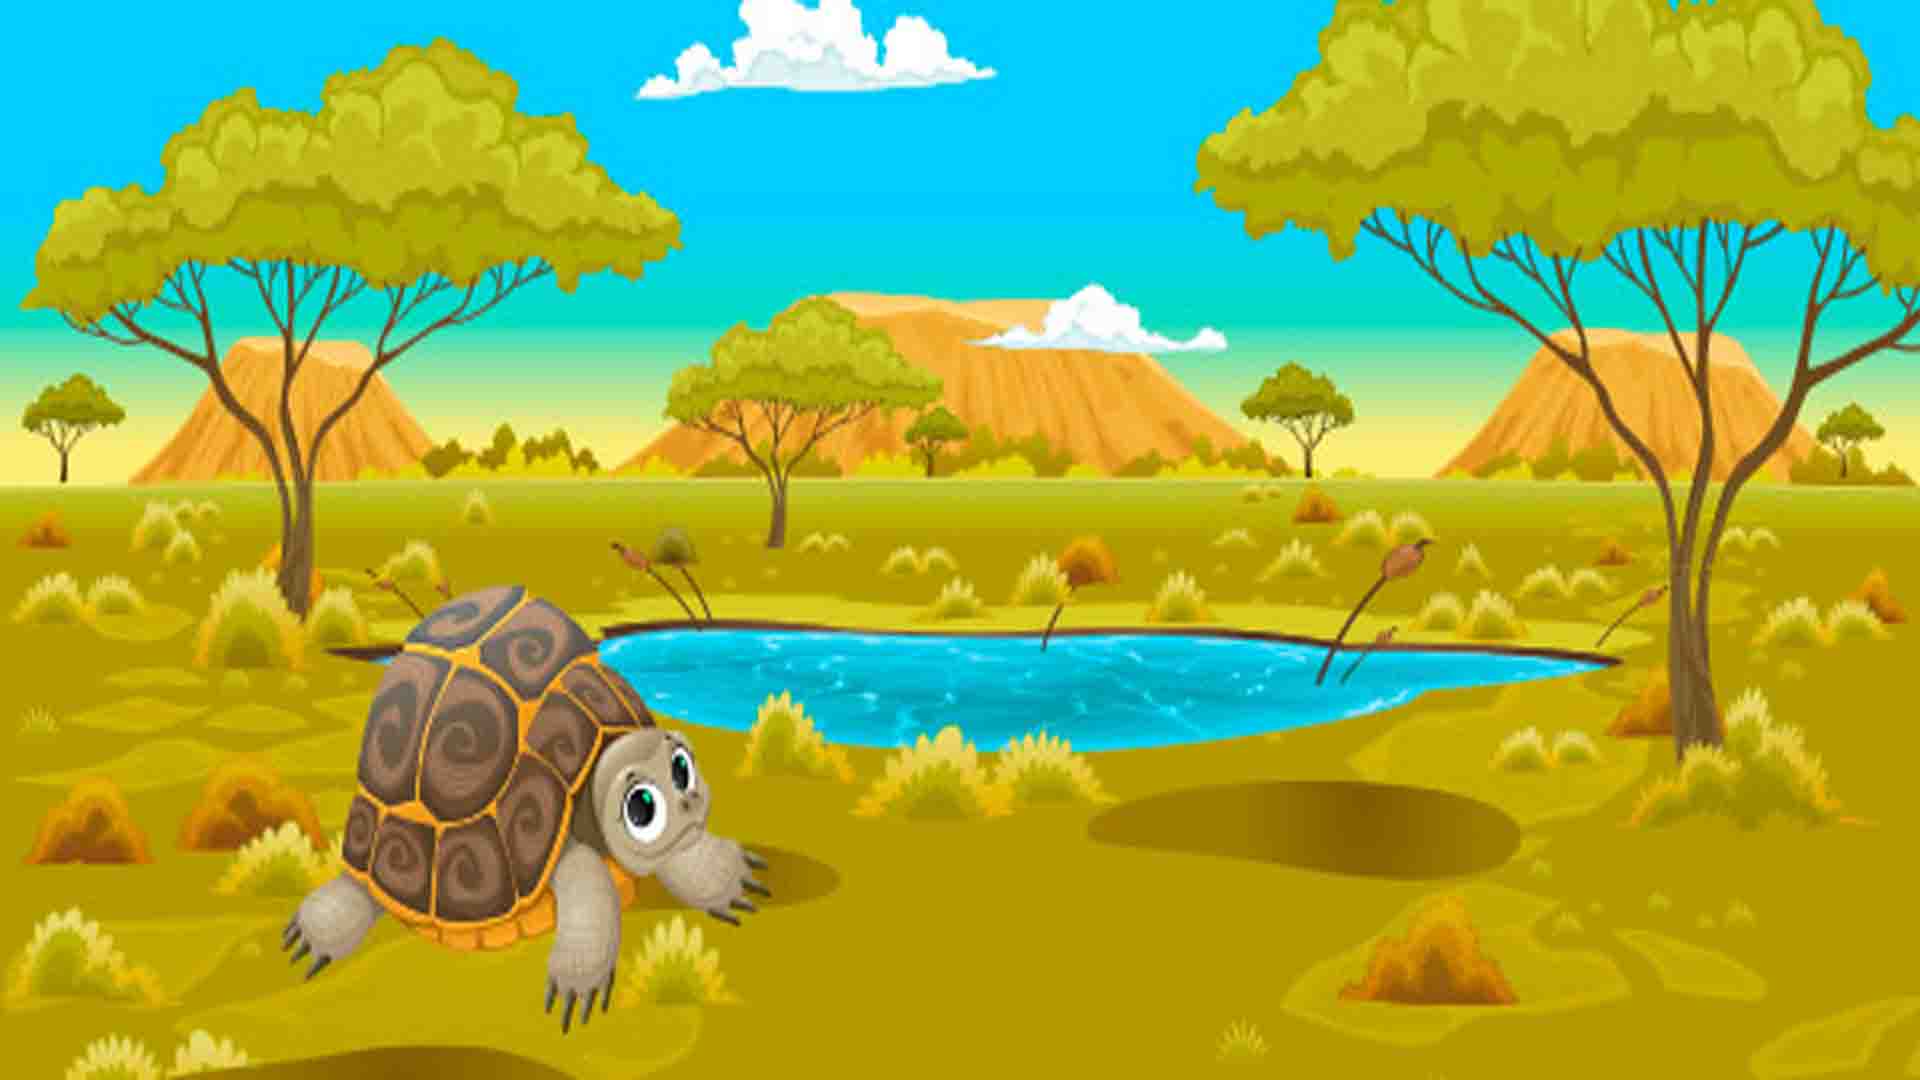 Kuta the smart turtle a long stories for kids | Long Stories in English